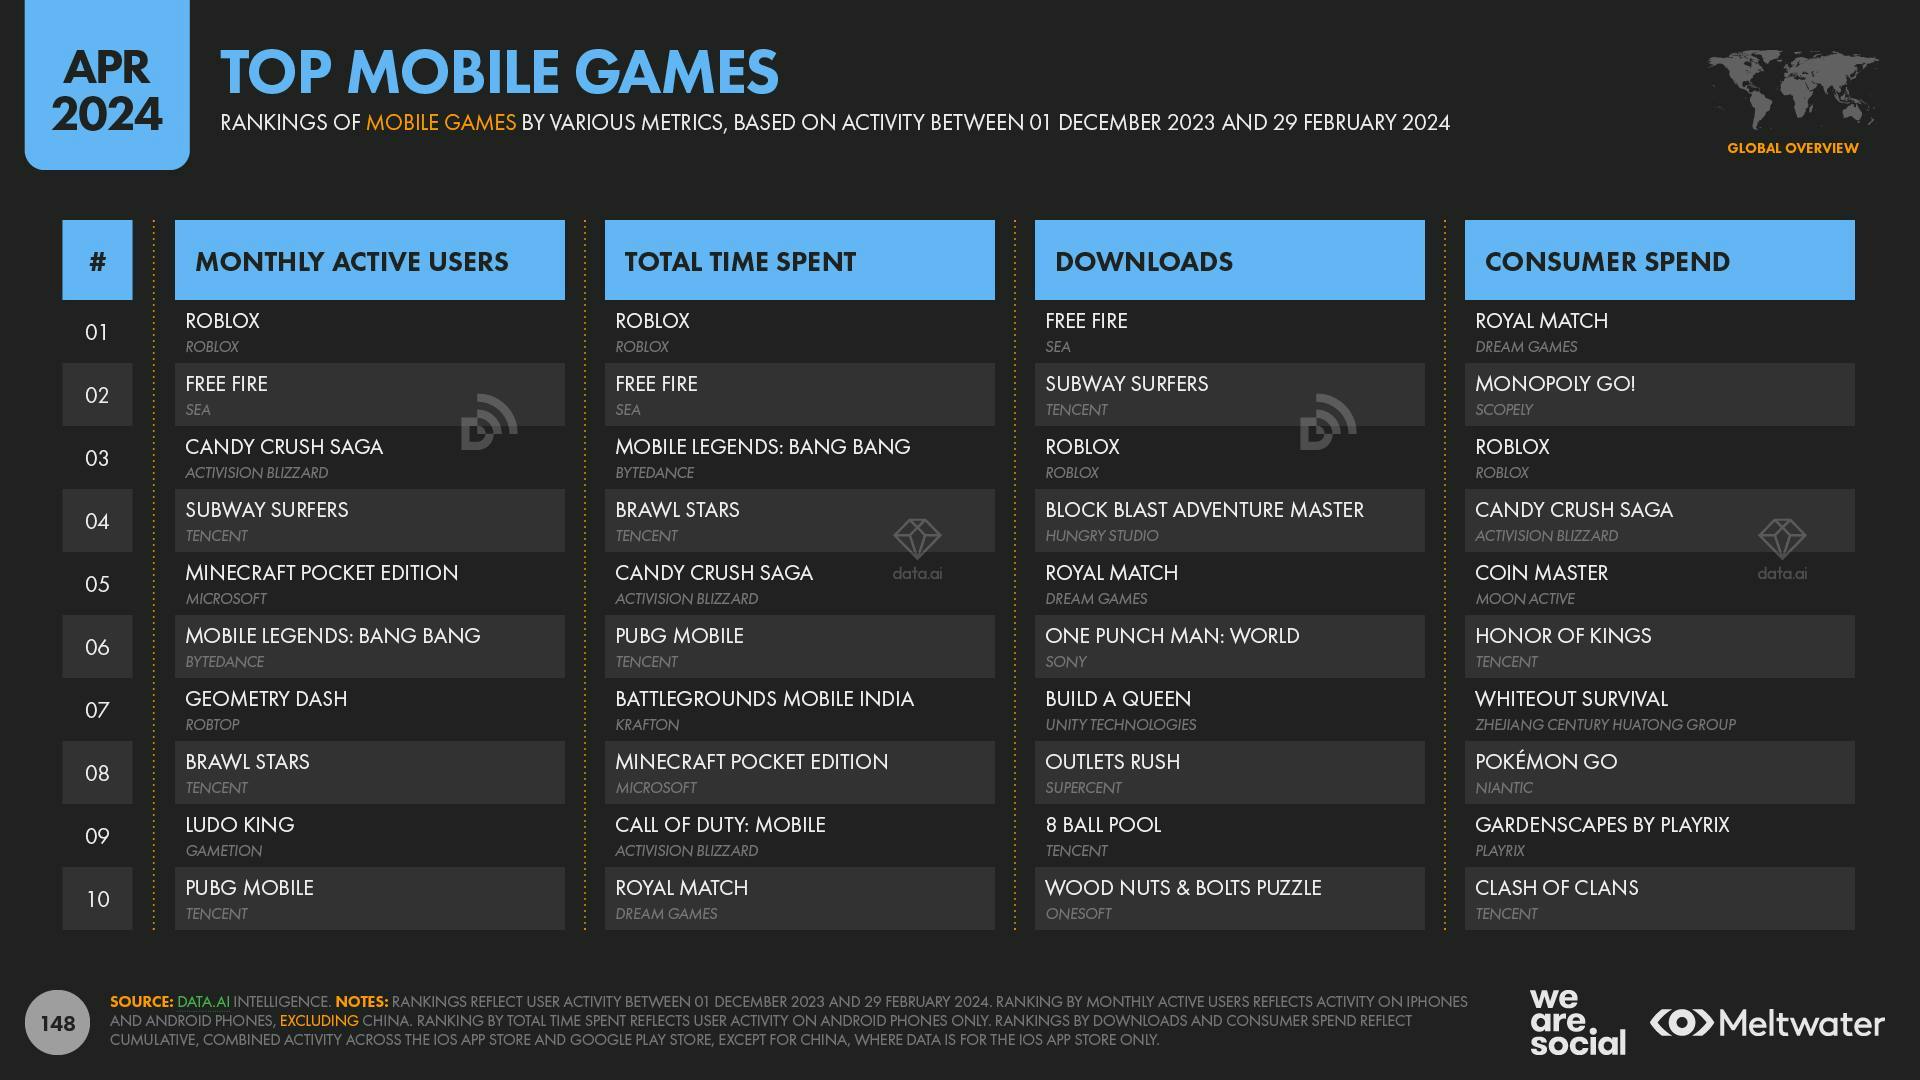 Top mobile games